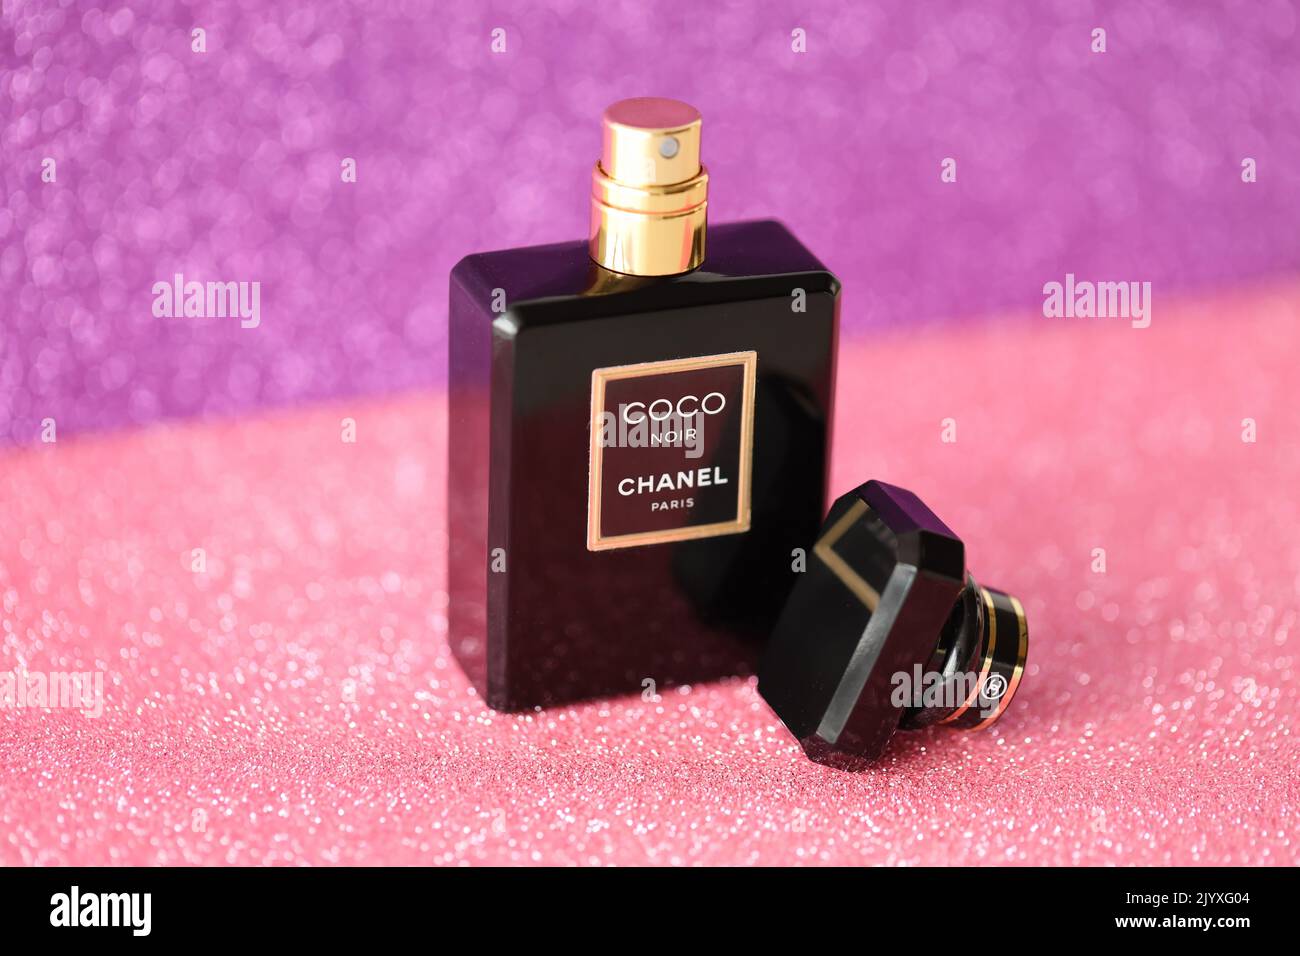 TERNOPIL, UKRAINE - SEPTEMBER 2, 2022 Coco Noir Chanel Paris worldwide famous french perfume black bottle on shiny glitter background in purple and pi Stock Photo